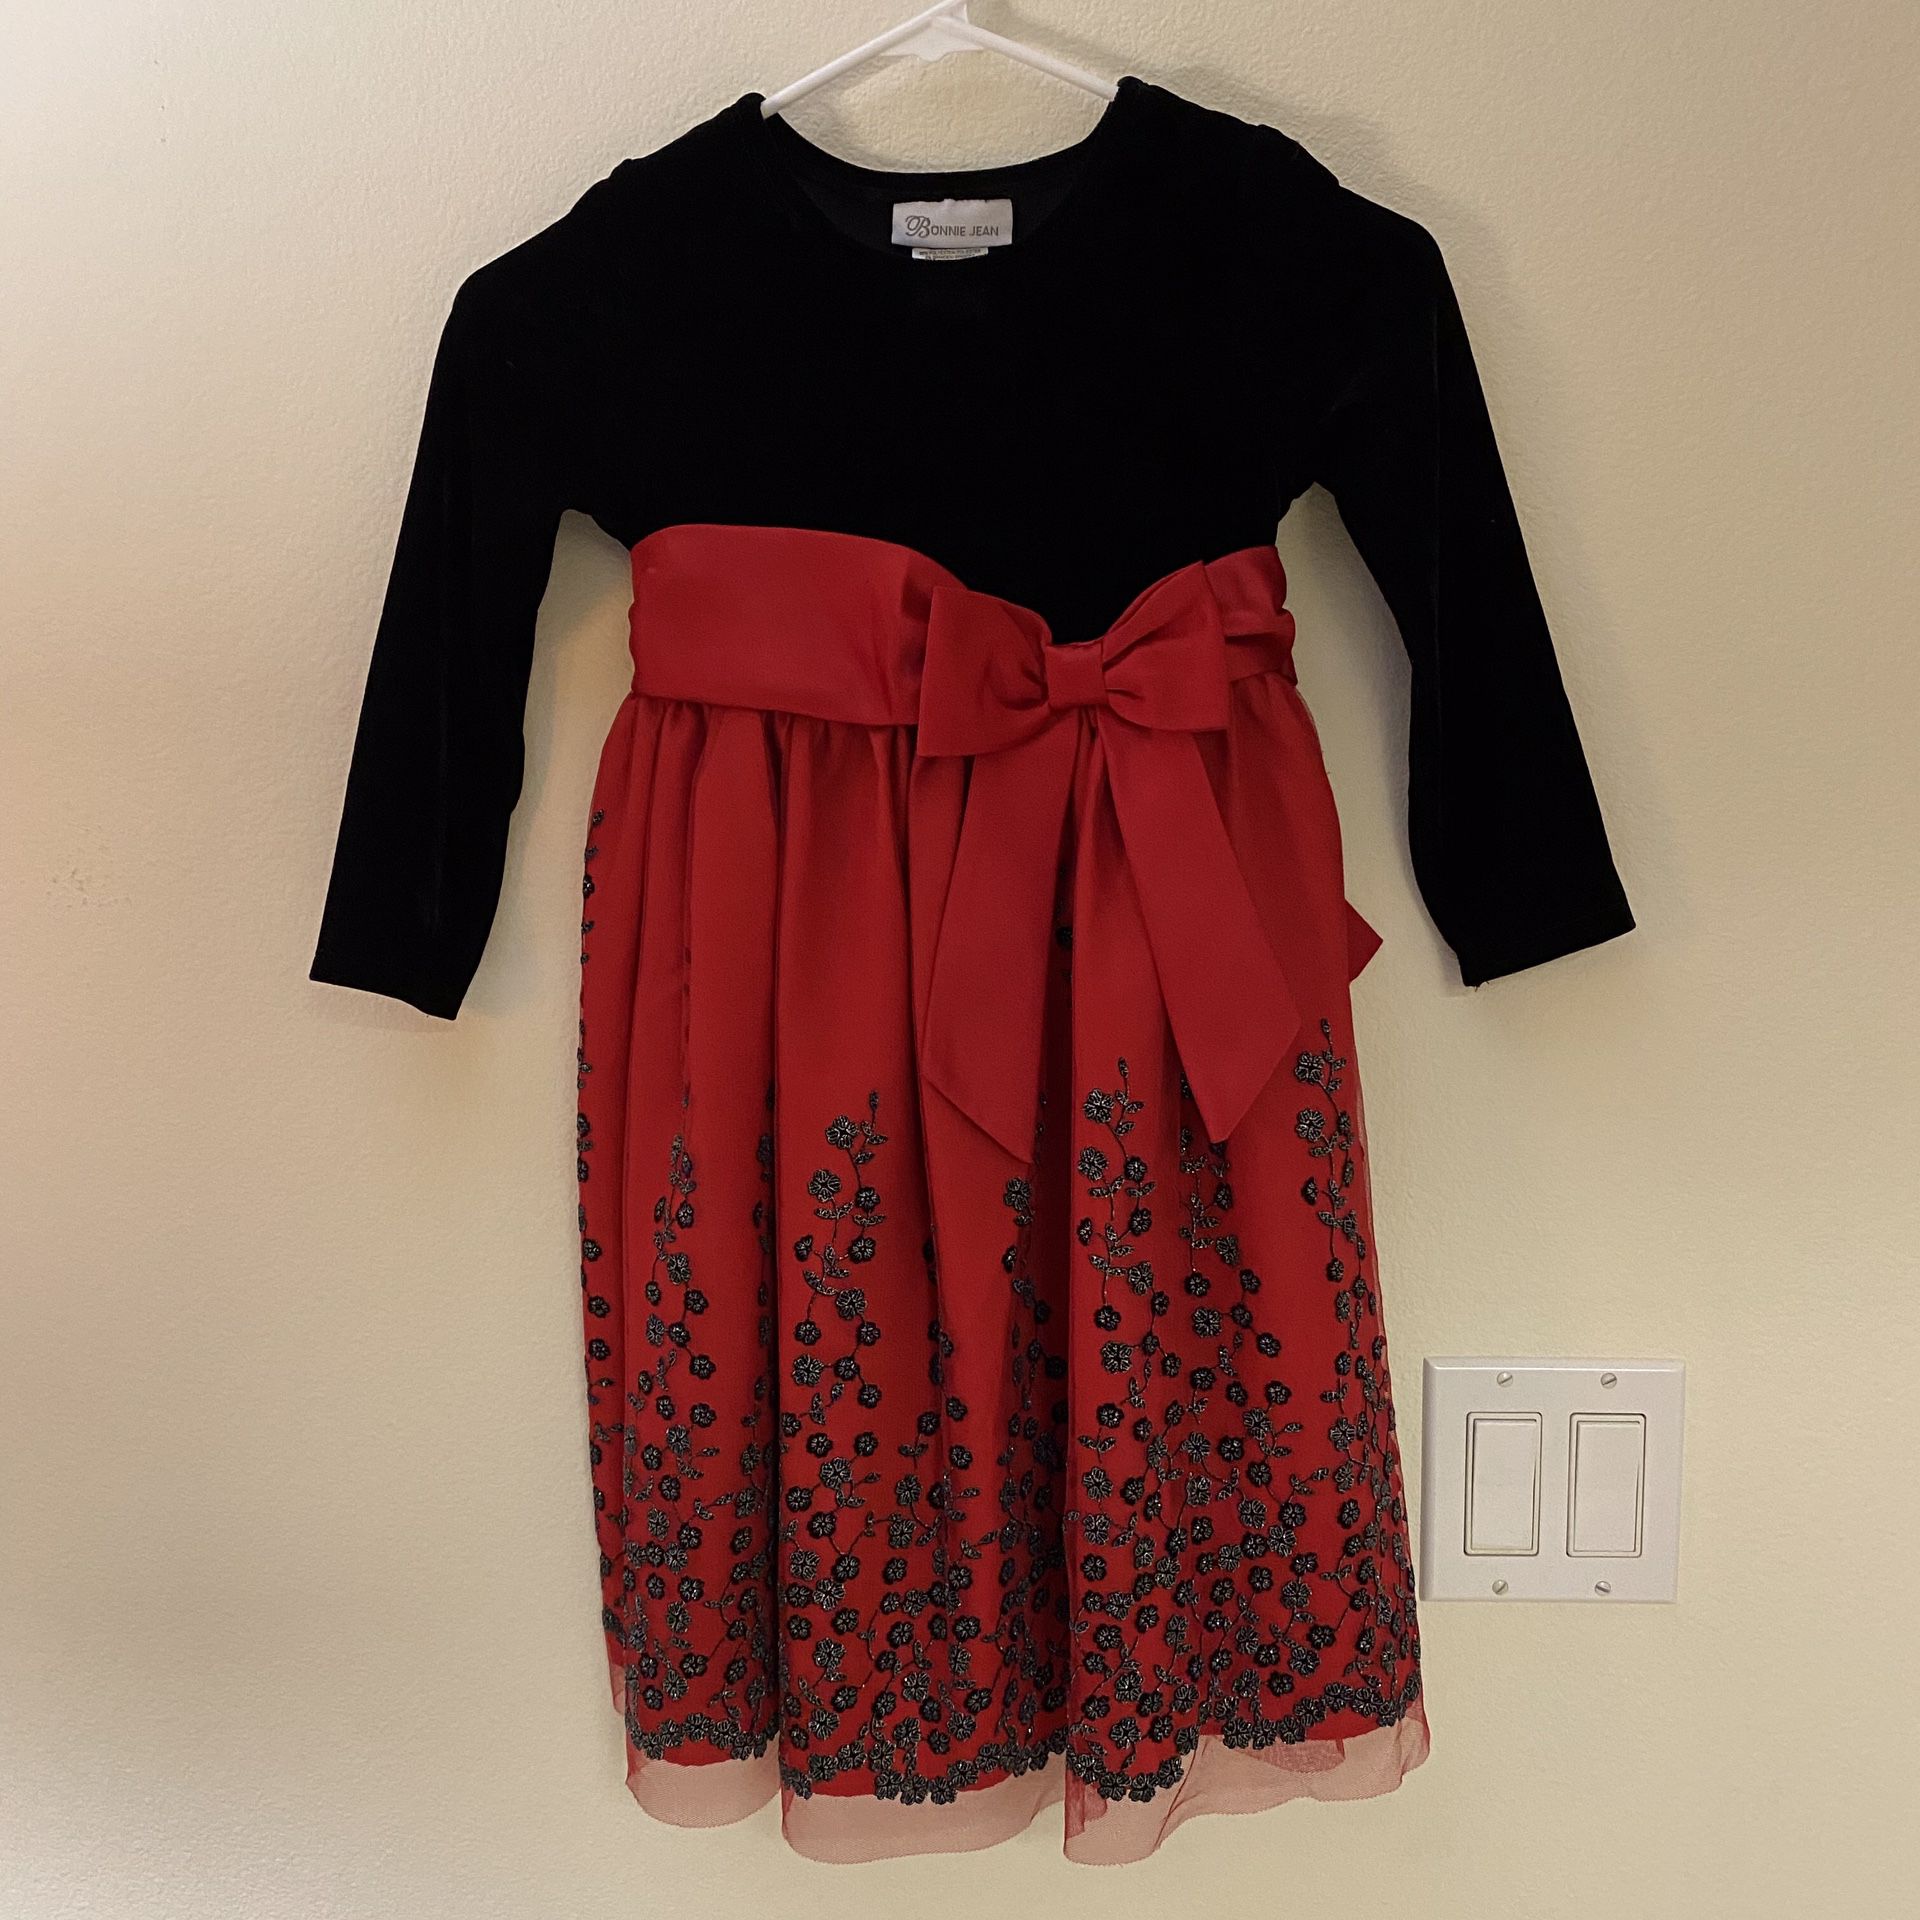 Bonnie Jean girls red and black holiday dress size 5